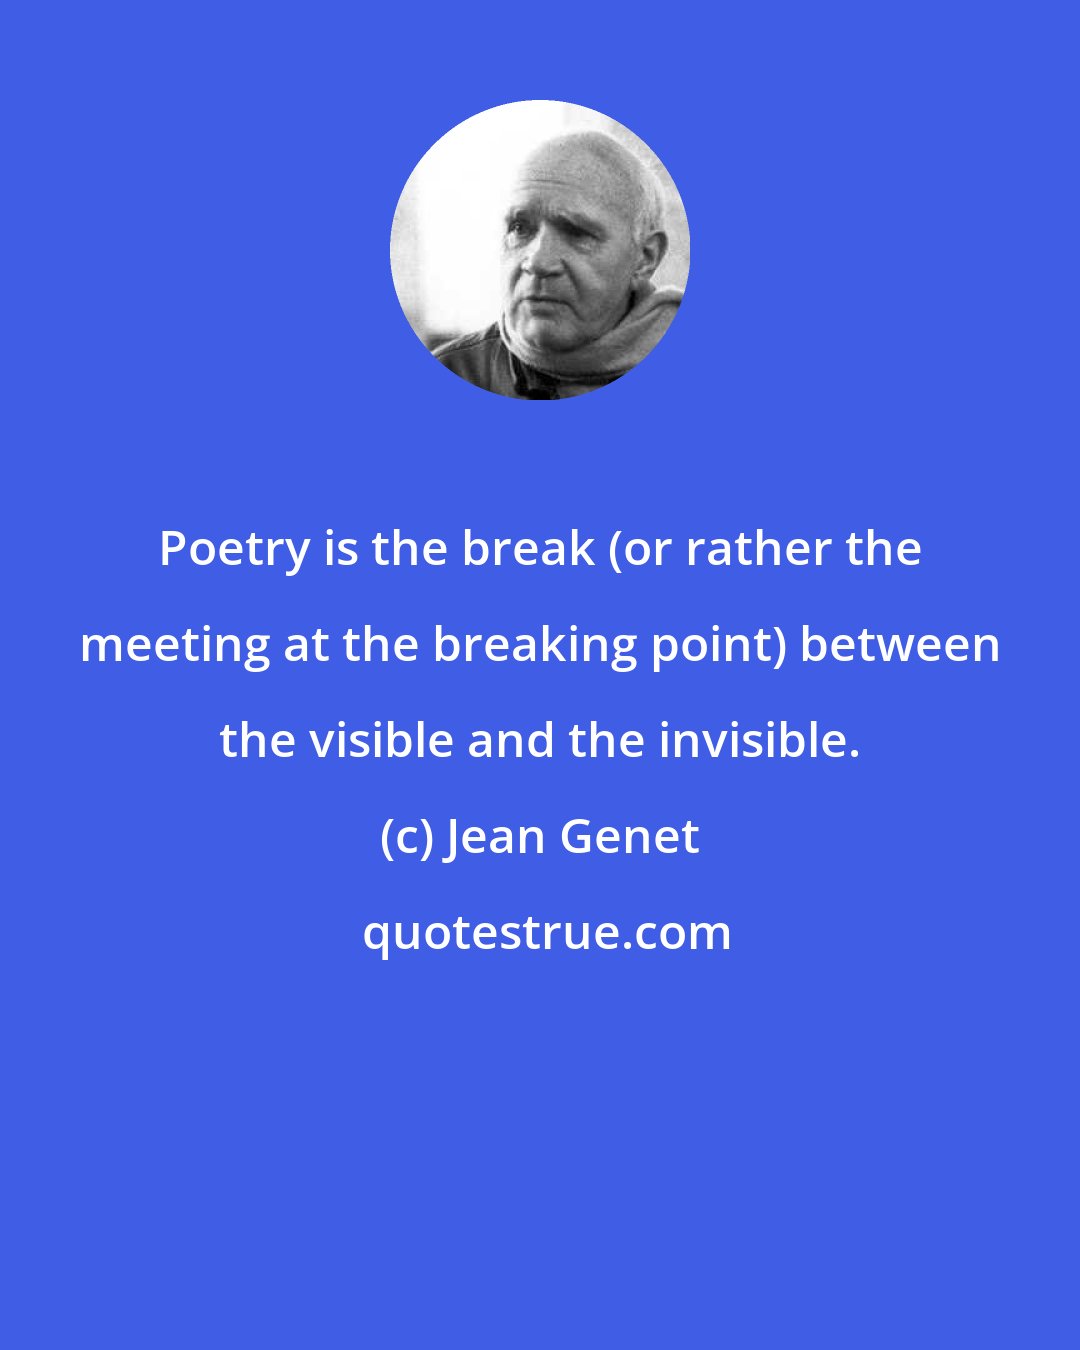 Jean Genet: Poetry is the break (or rather the meeting at the breaking point) between the visible and the invisible.